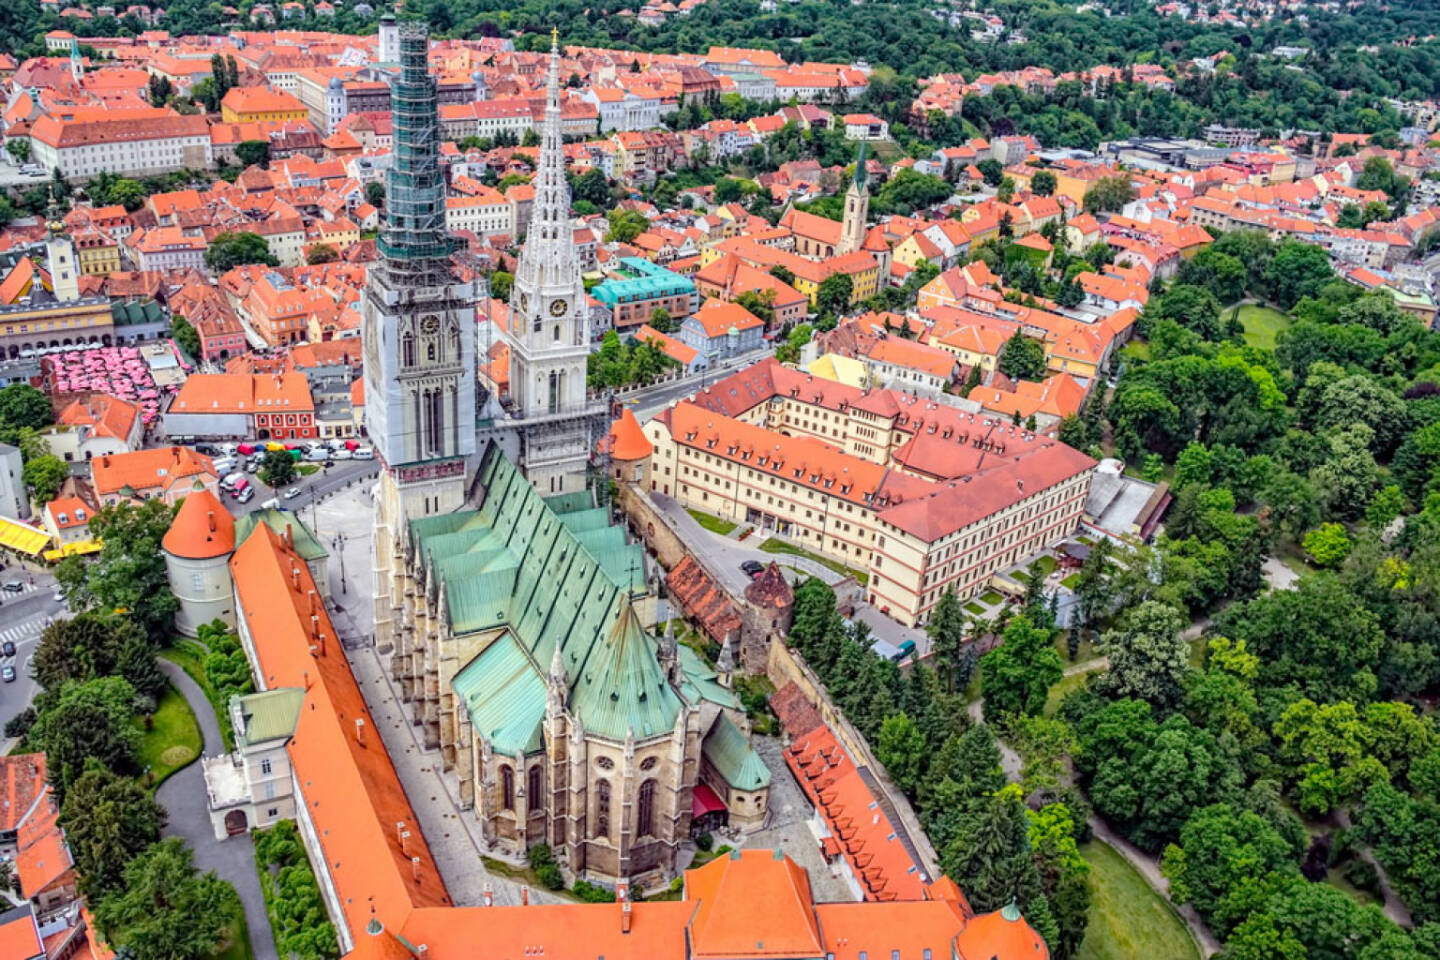 Zagreb, Kroatien, http://www.shutterstock.com/de/pic-133726574/stock-photo-zagreb-cathedral-with-archbishop-s-palace-croatia-helicopter-aerial-view.html 